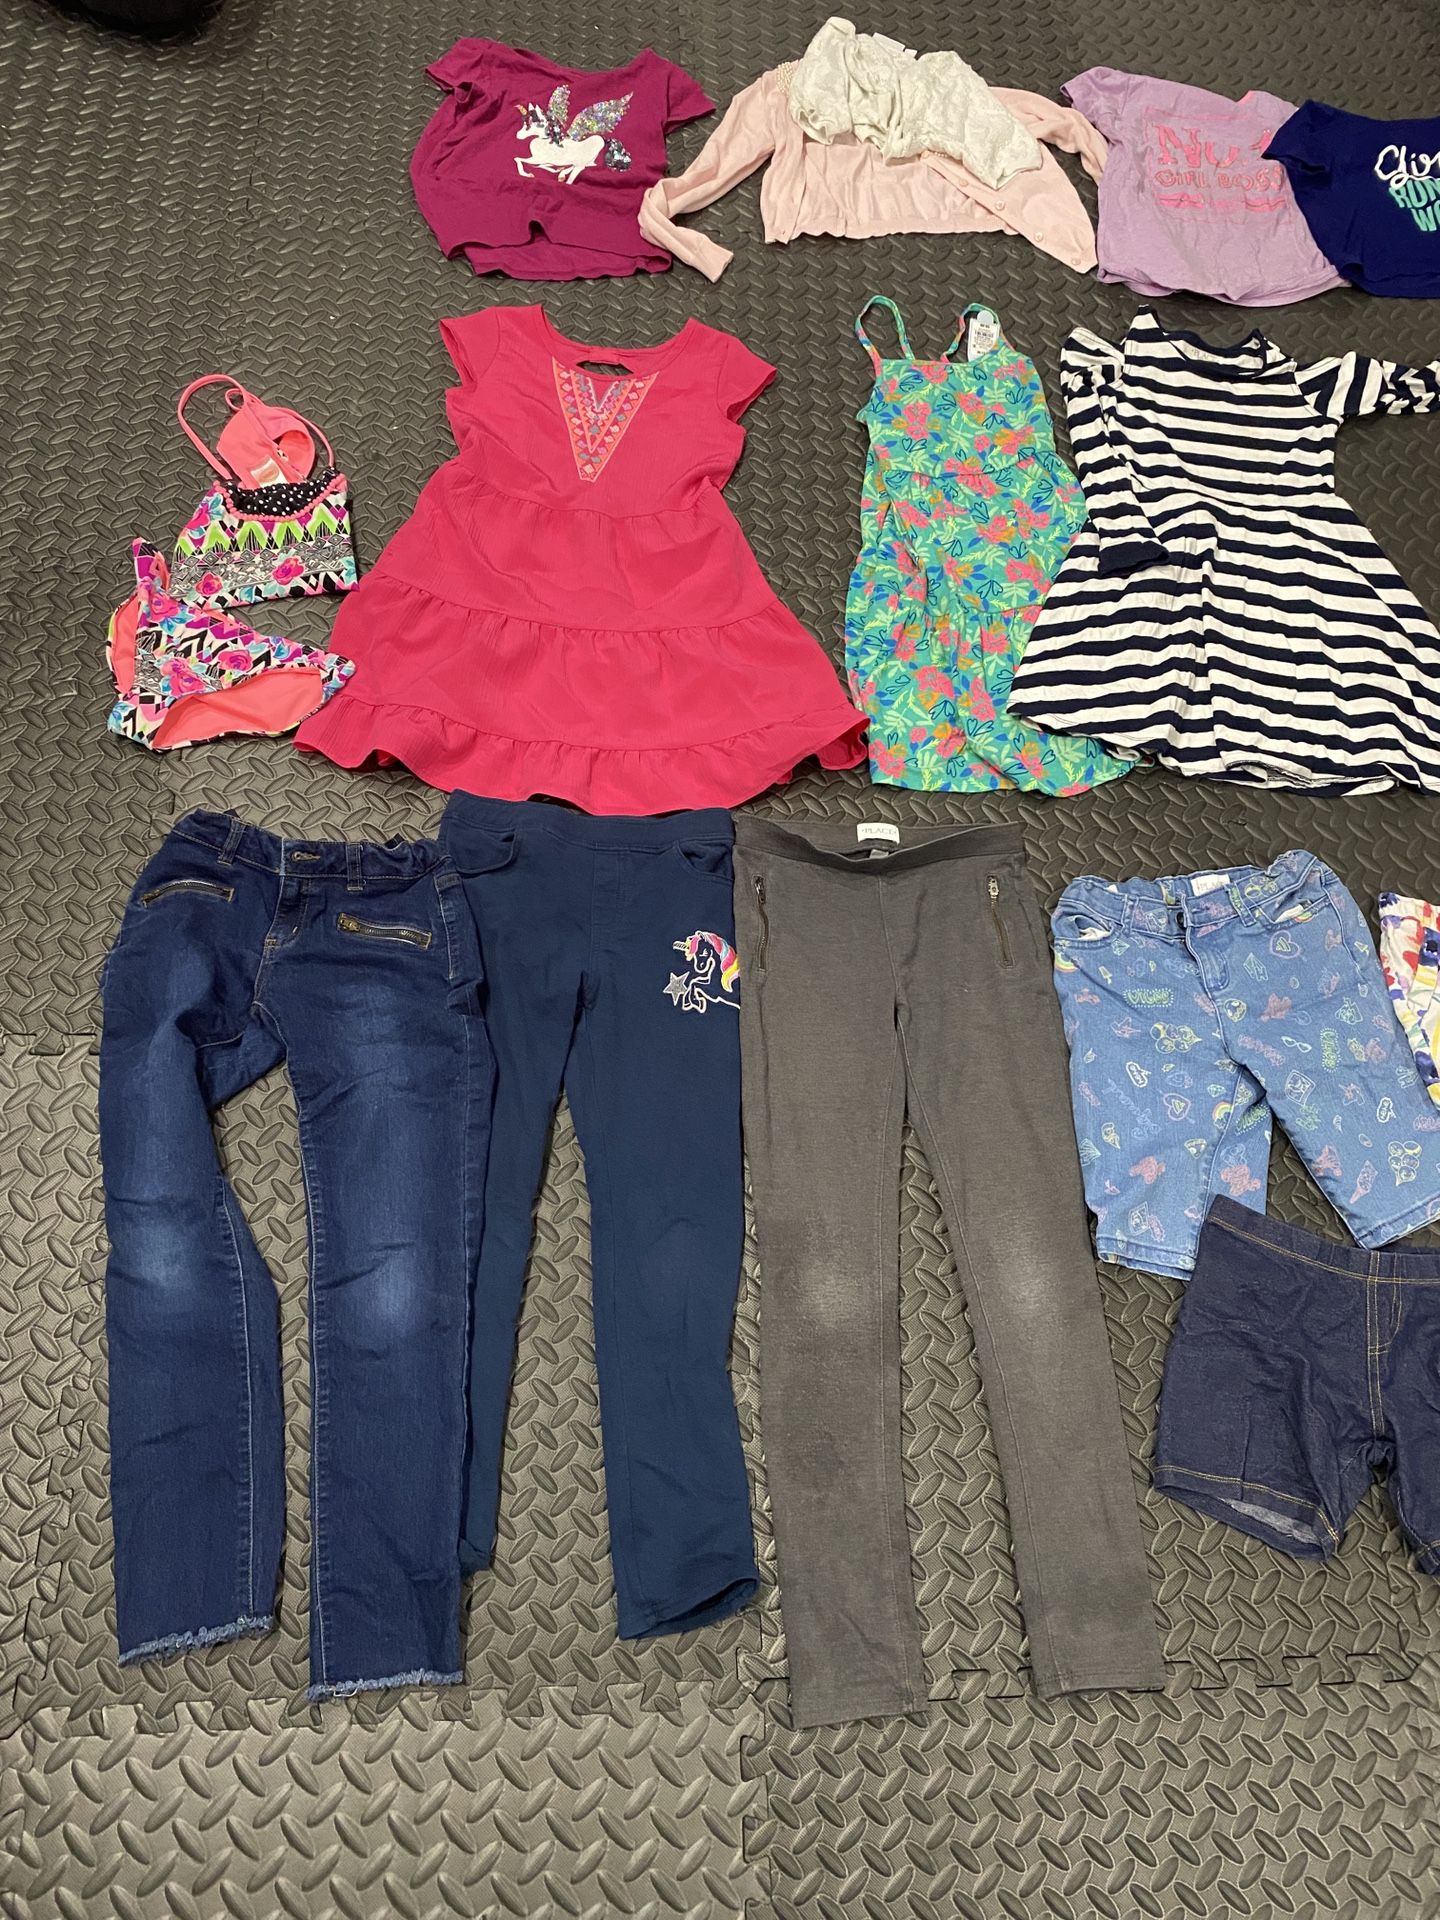 Girls clothing- children’s place and target.